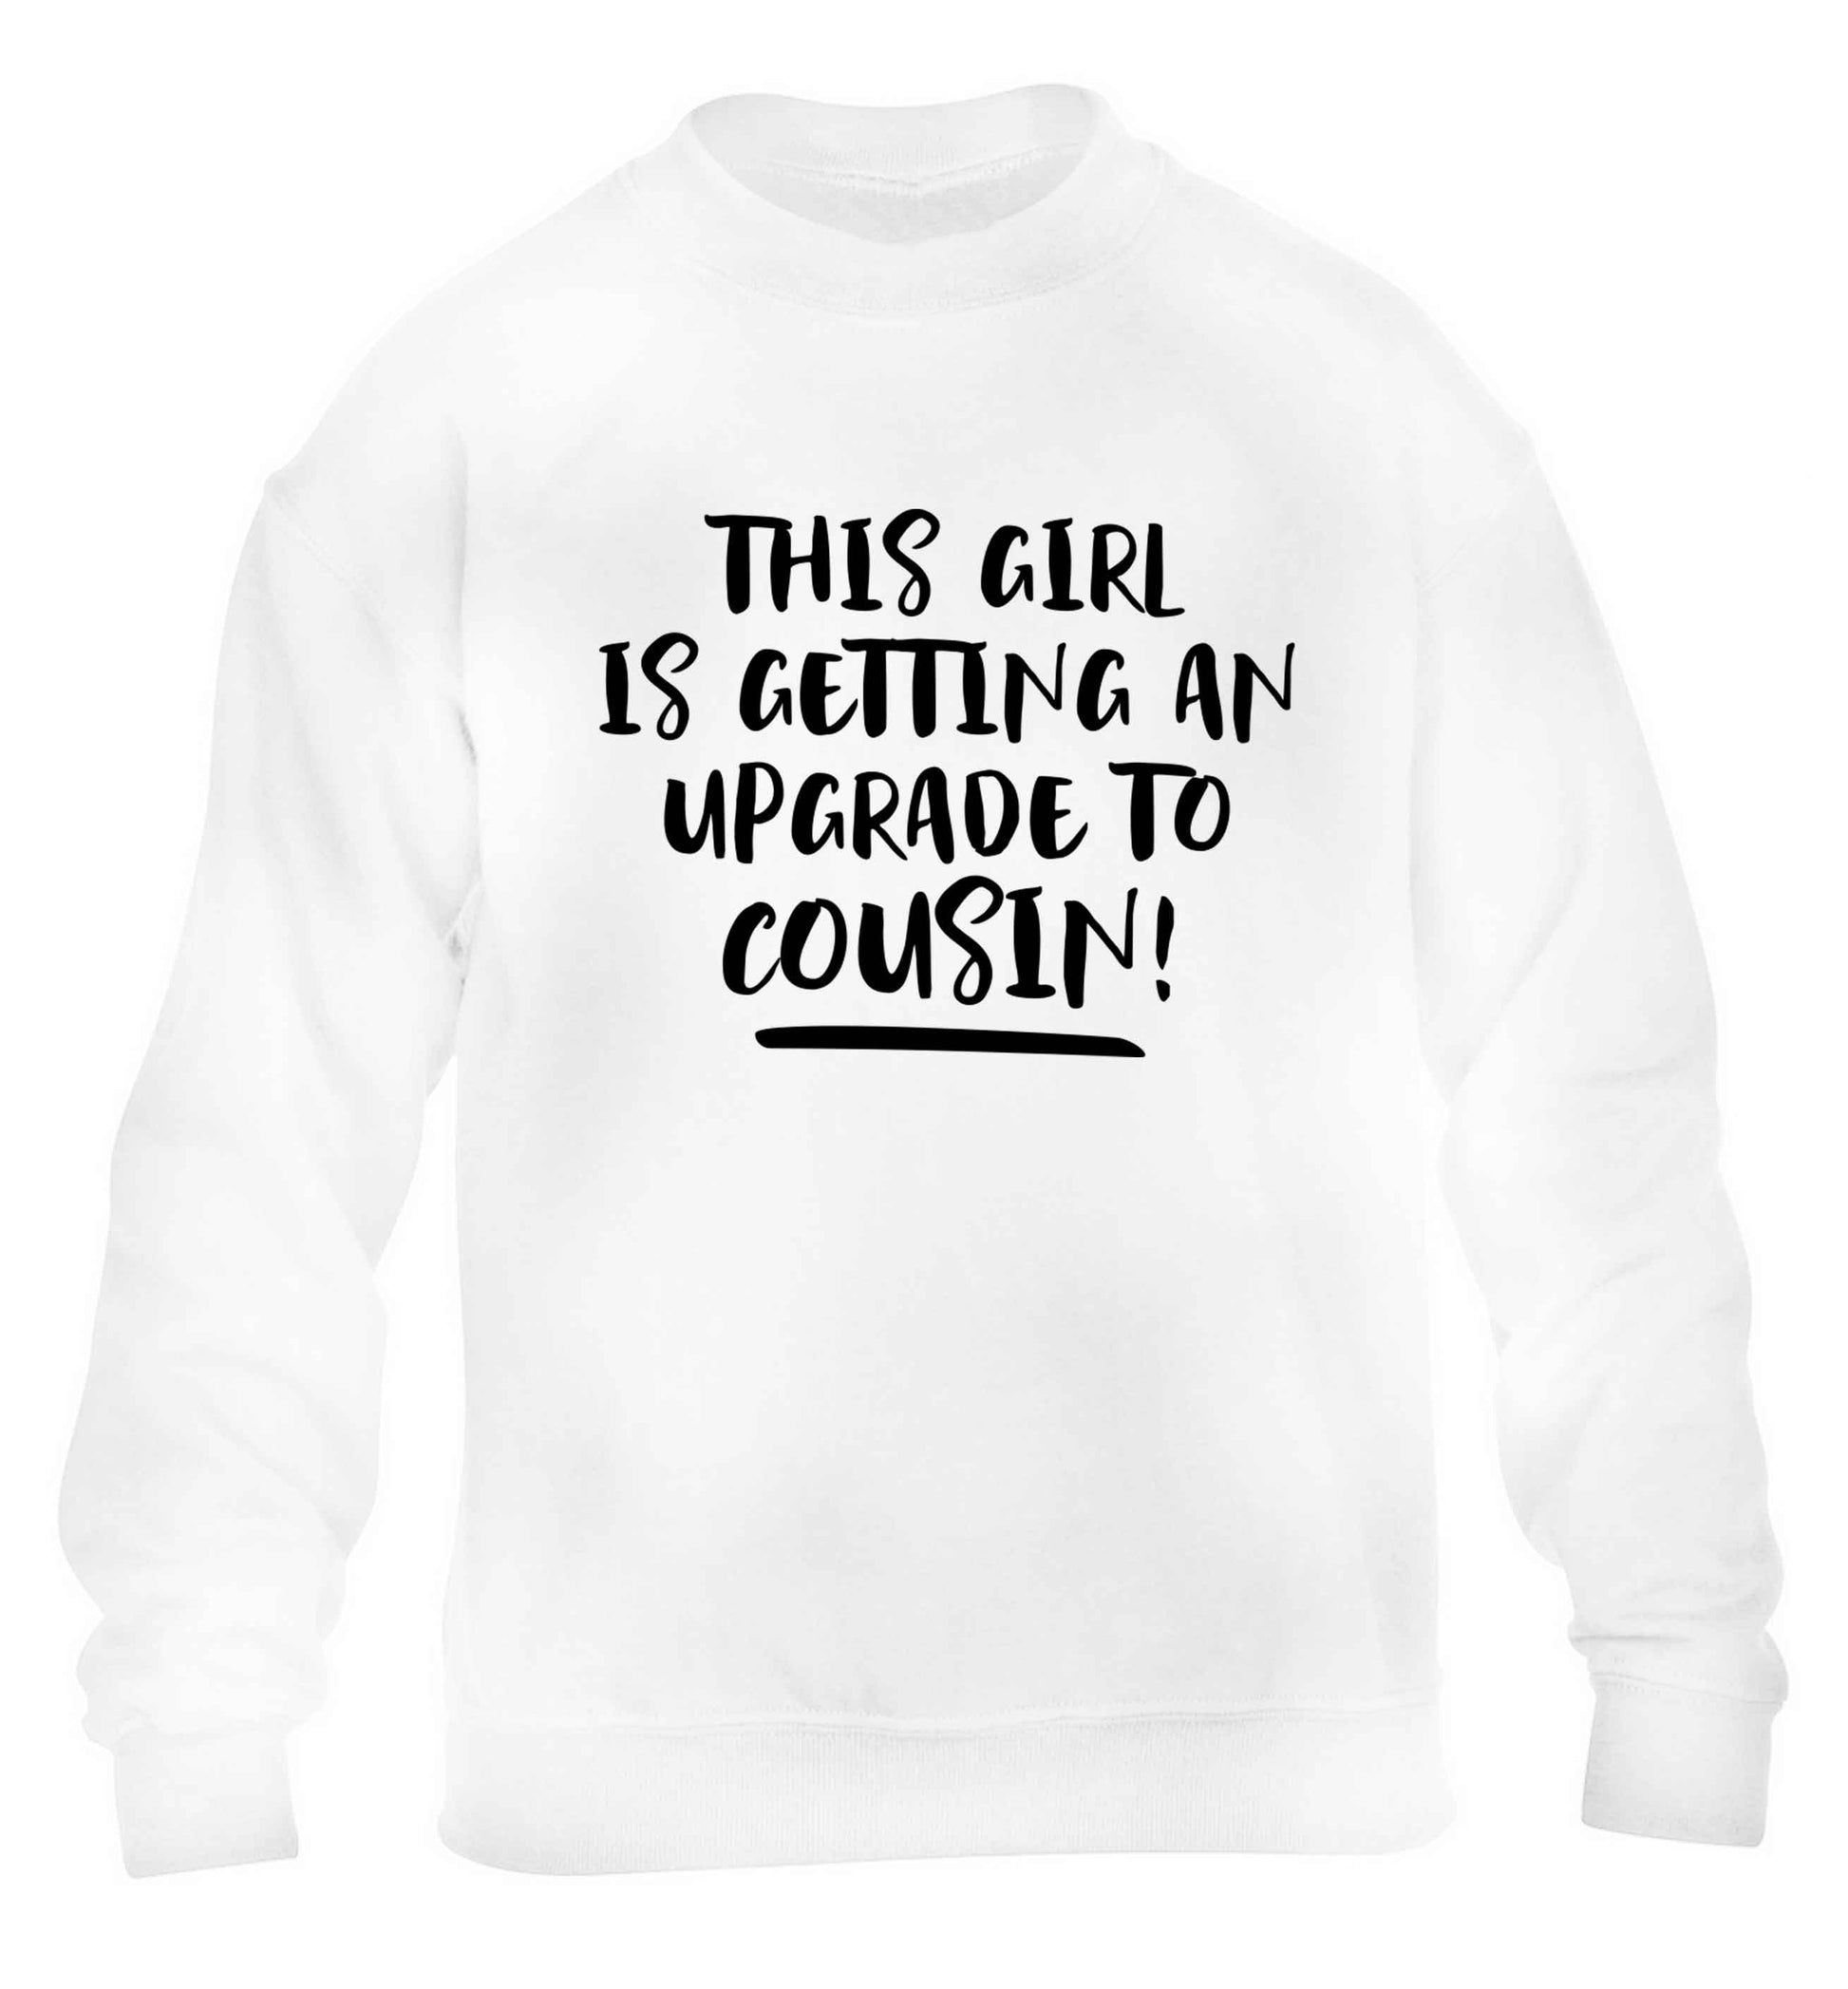 This girl is getting an upgrade to cousin! children's white sweater 12-13 Years